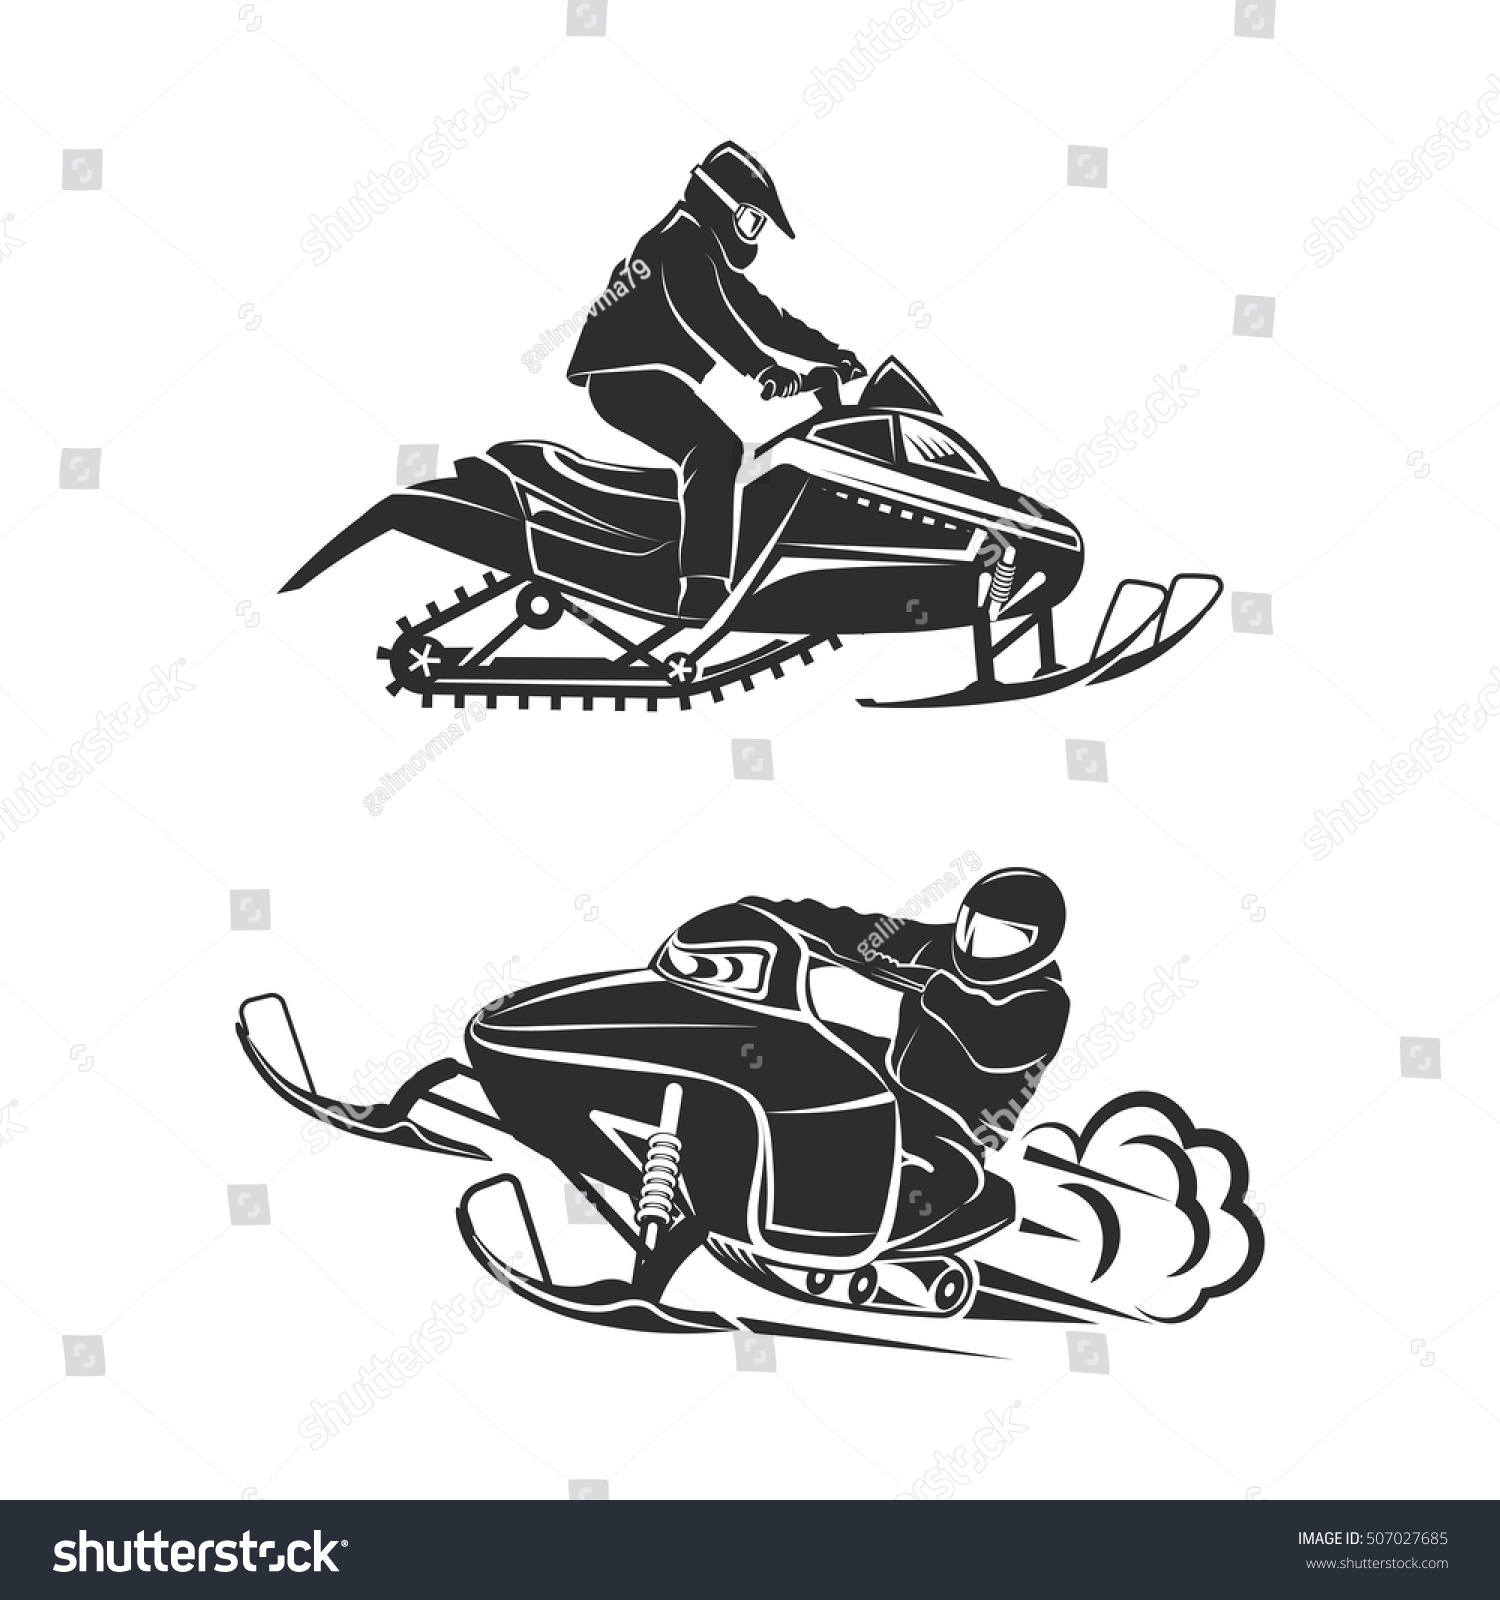 Download Snowmobiling Silhouette On White Background Vector Stock ...